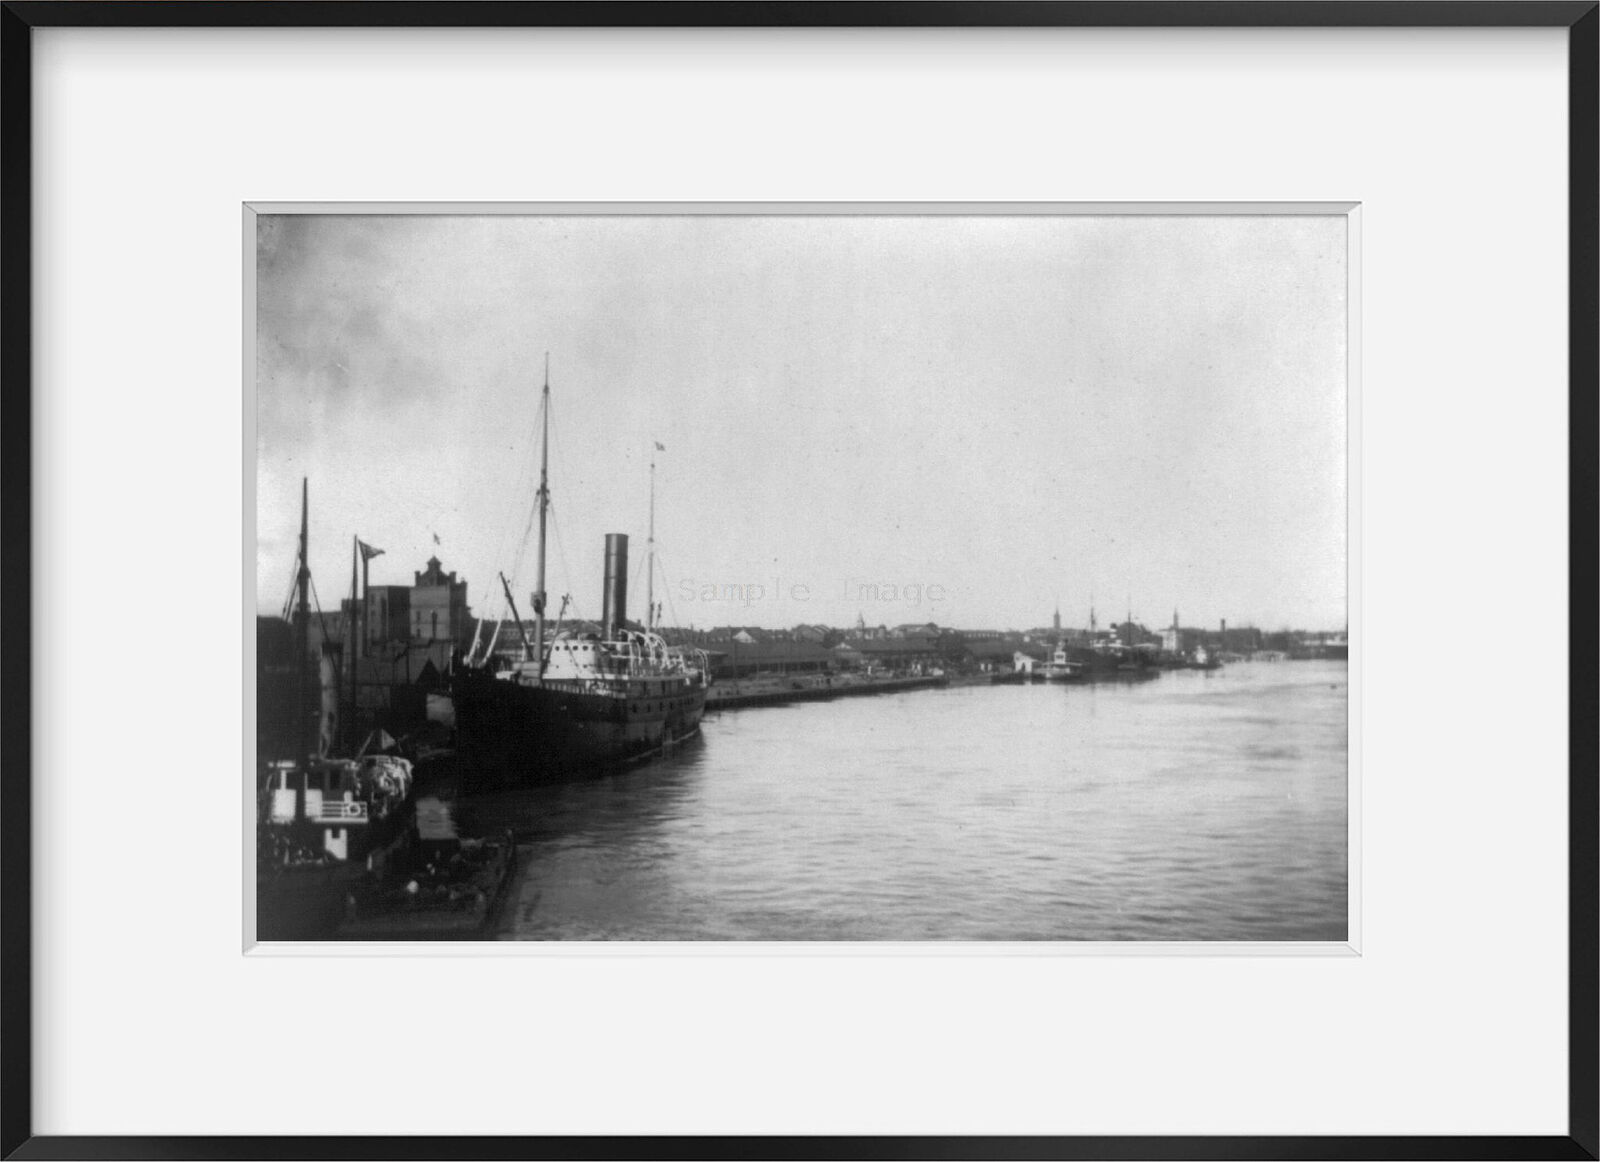 1898 Feb 8 Photograph Of Mississippi River Views: New Orleans Harbor, Feb. 8, 18